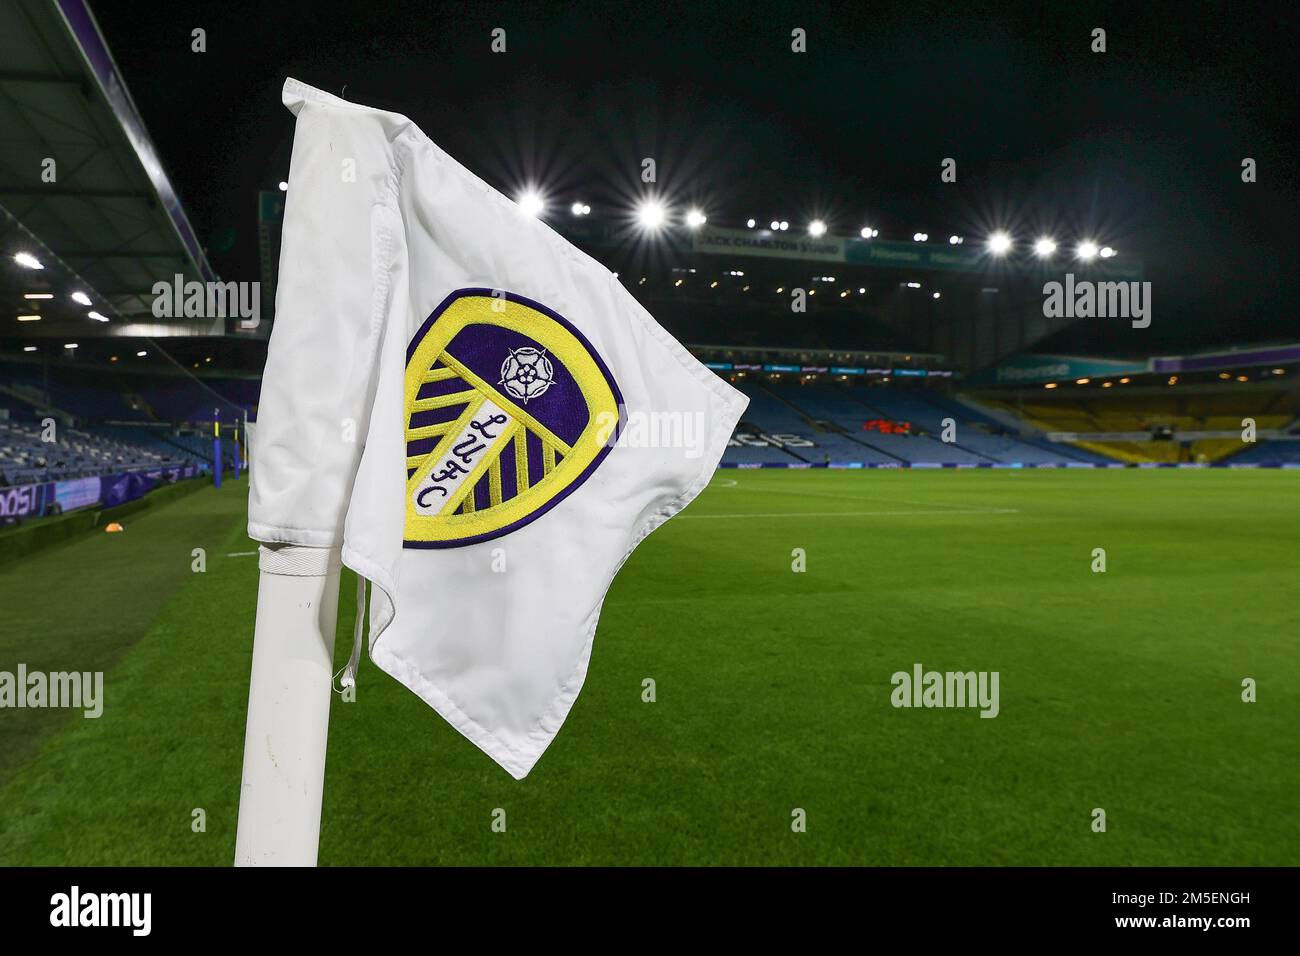 General view of the Leeds United branded corner flag at Elland Road, Home of Leeds United ahead of the Premier League match Leeds United vs Manchester City at Elland Road, Leeds, United Kingdom, 28th December 2022  (Photo by Mark Cosgrove/News Images) Stock Photo